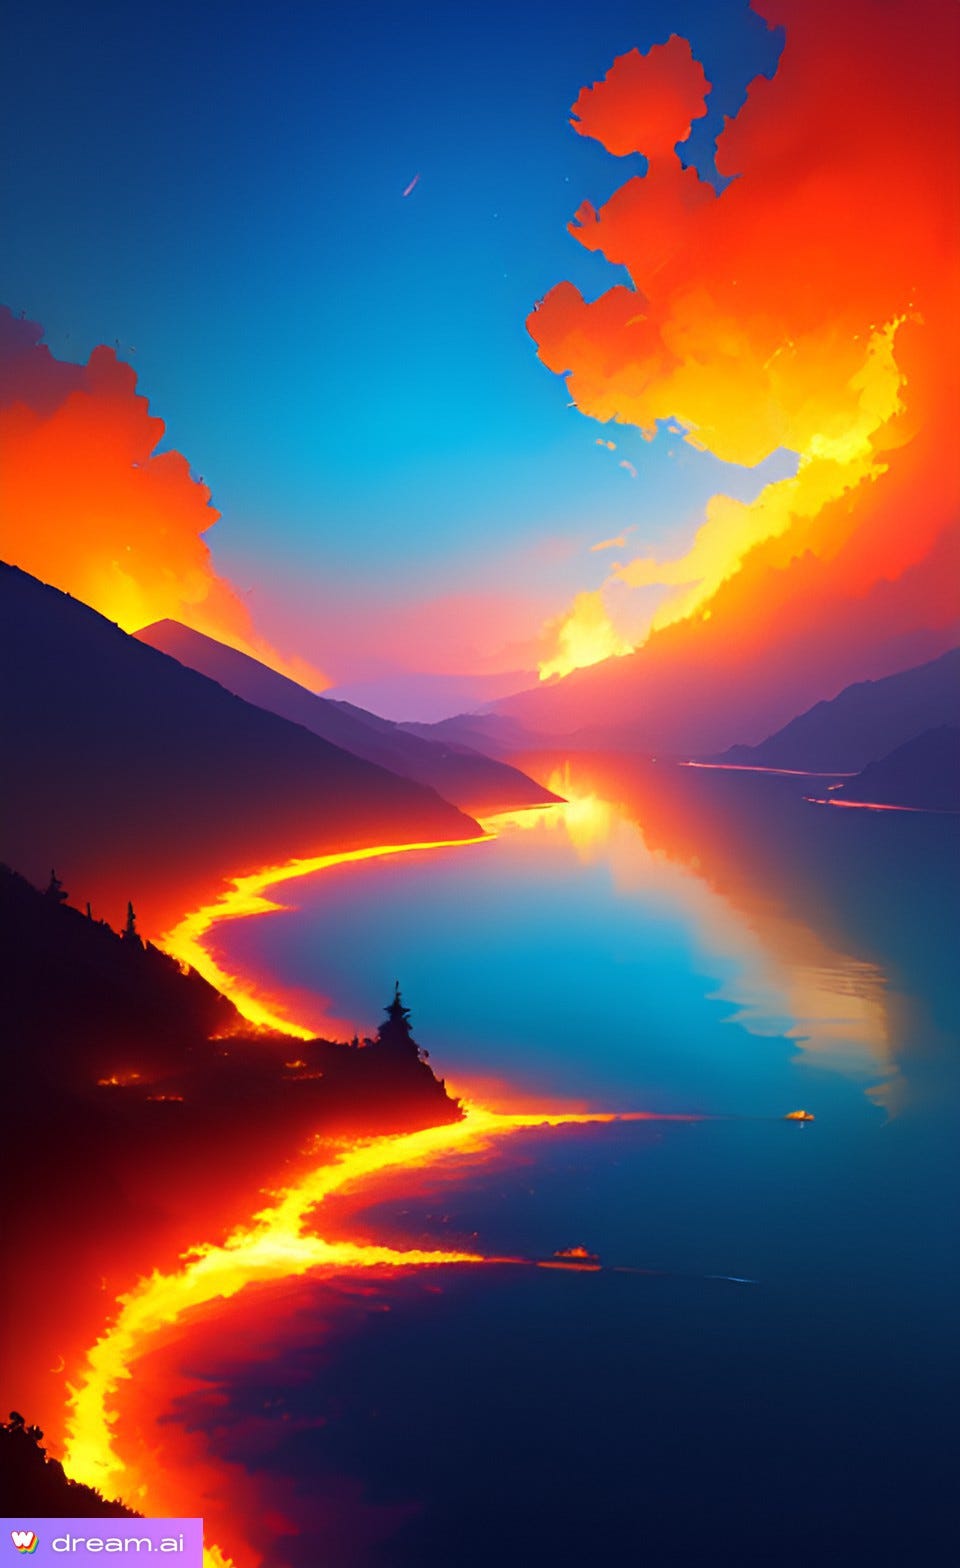 anime-style image of a lake surrounded by mountains, the water rimmed by fire